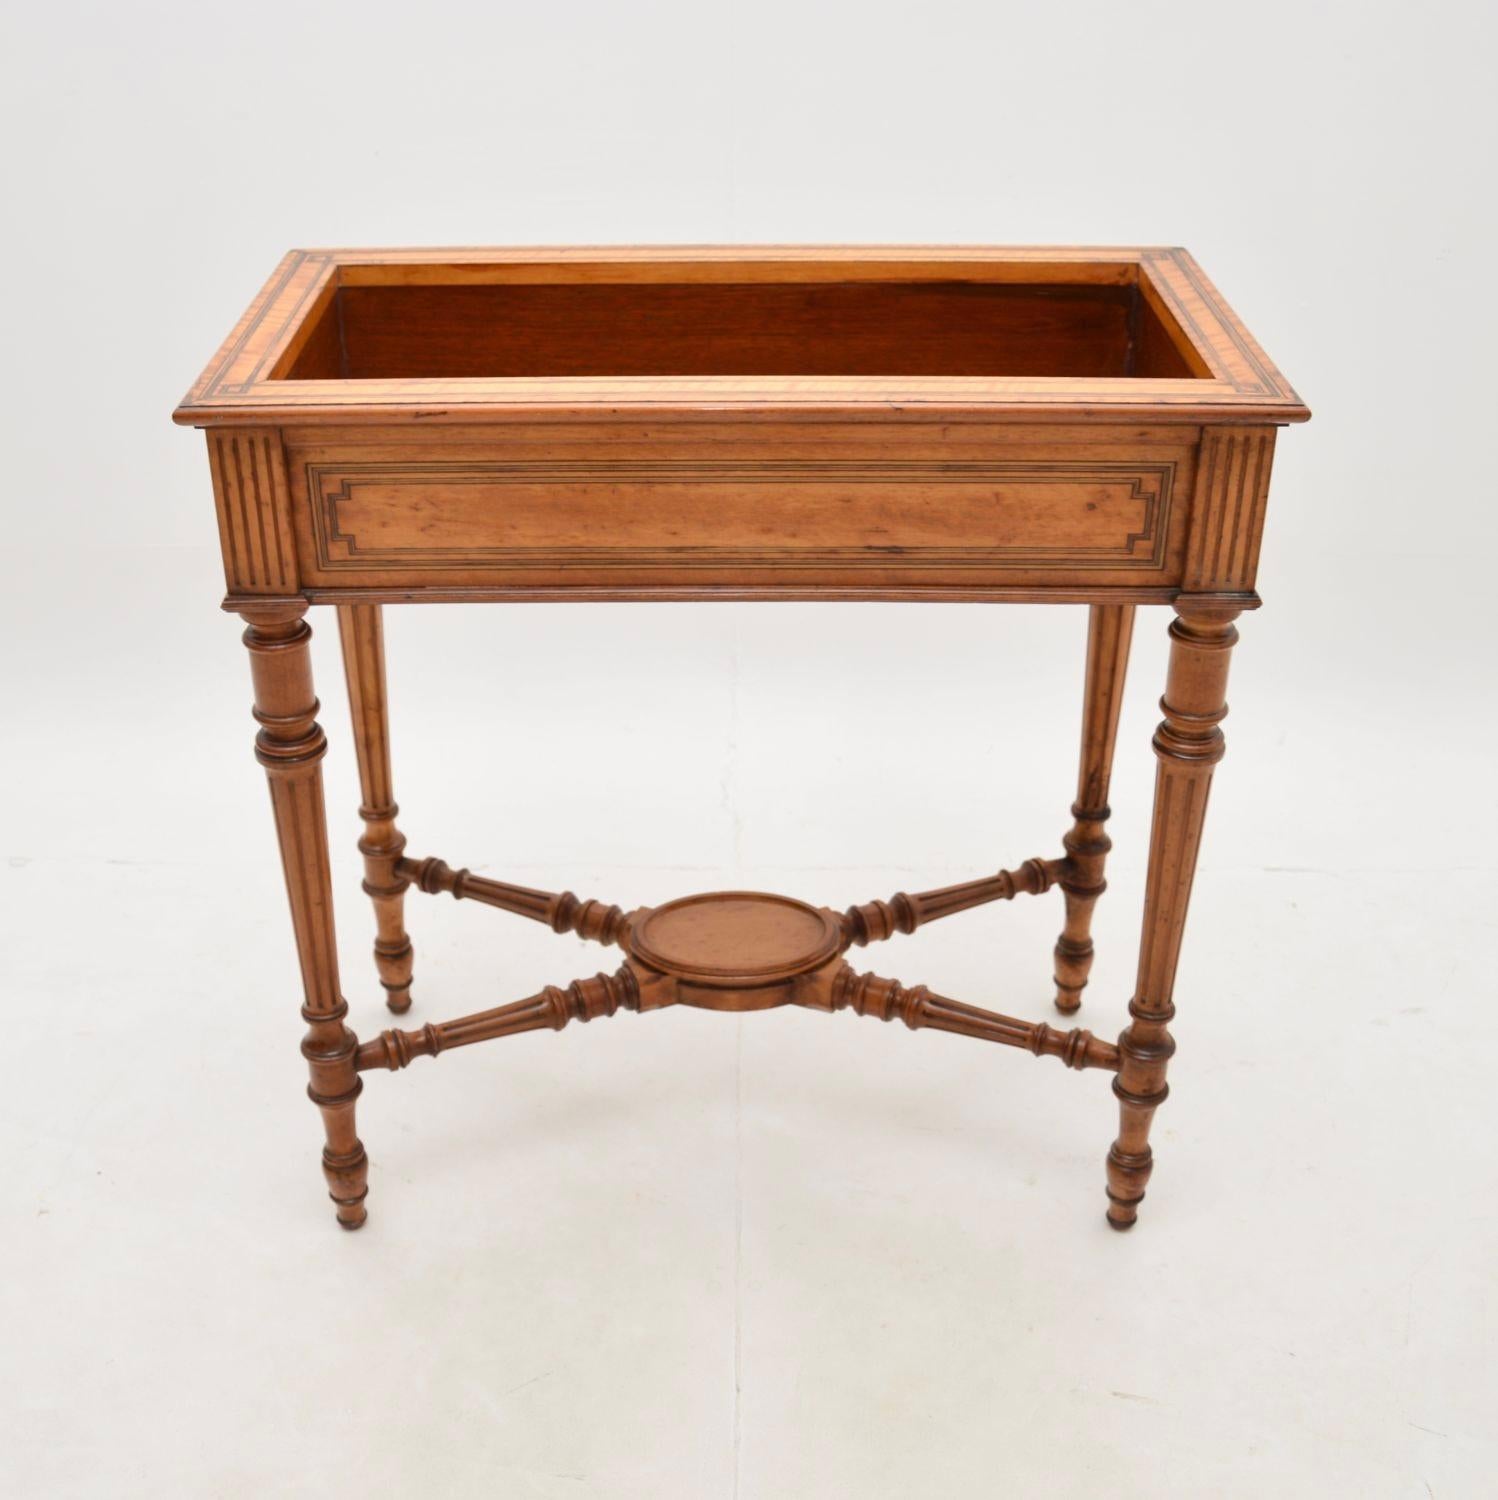 A stunning antique Victorian inlaid satinwood plant trough. This was made in England, it dates from around the 1880-1900 period.

It is of superb quality and is a lovely size, finished identically front and back so it can be used as a free standing